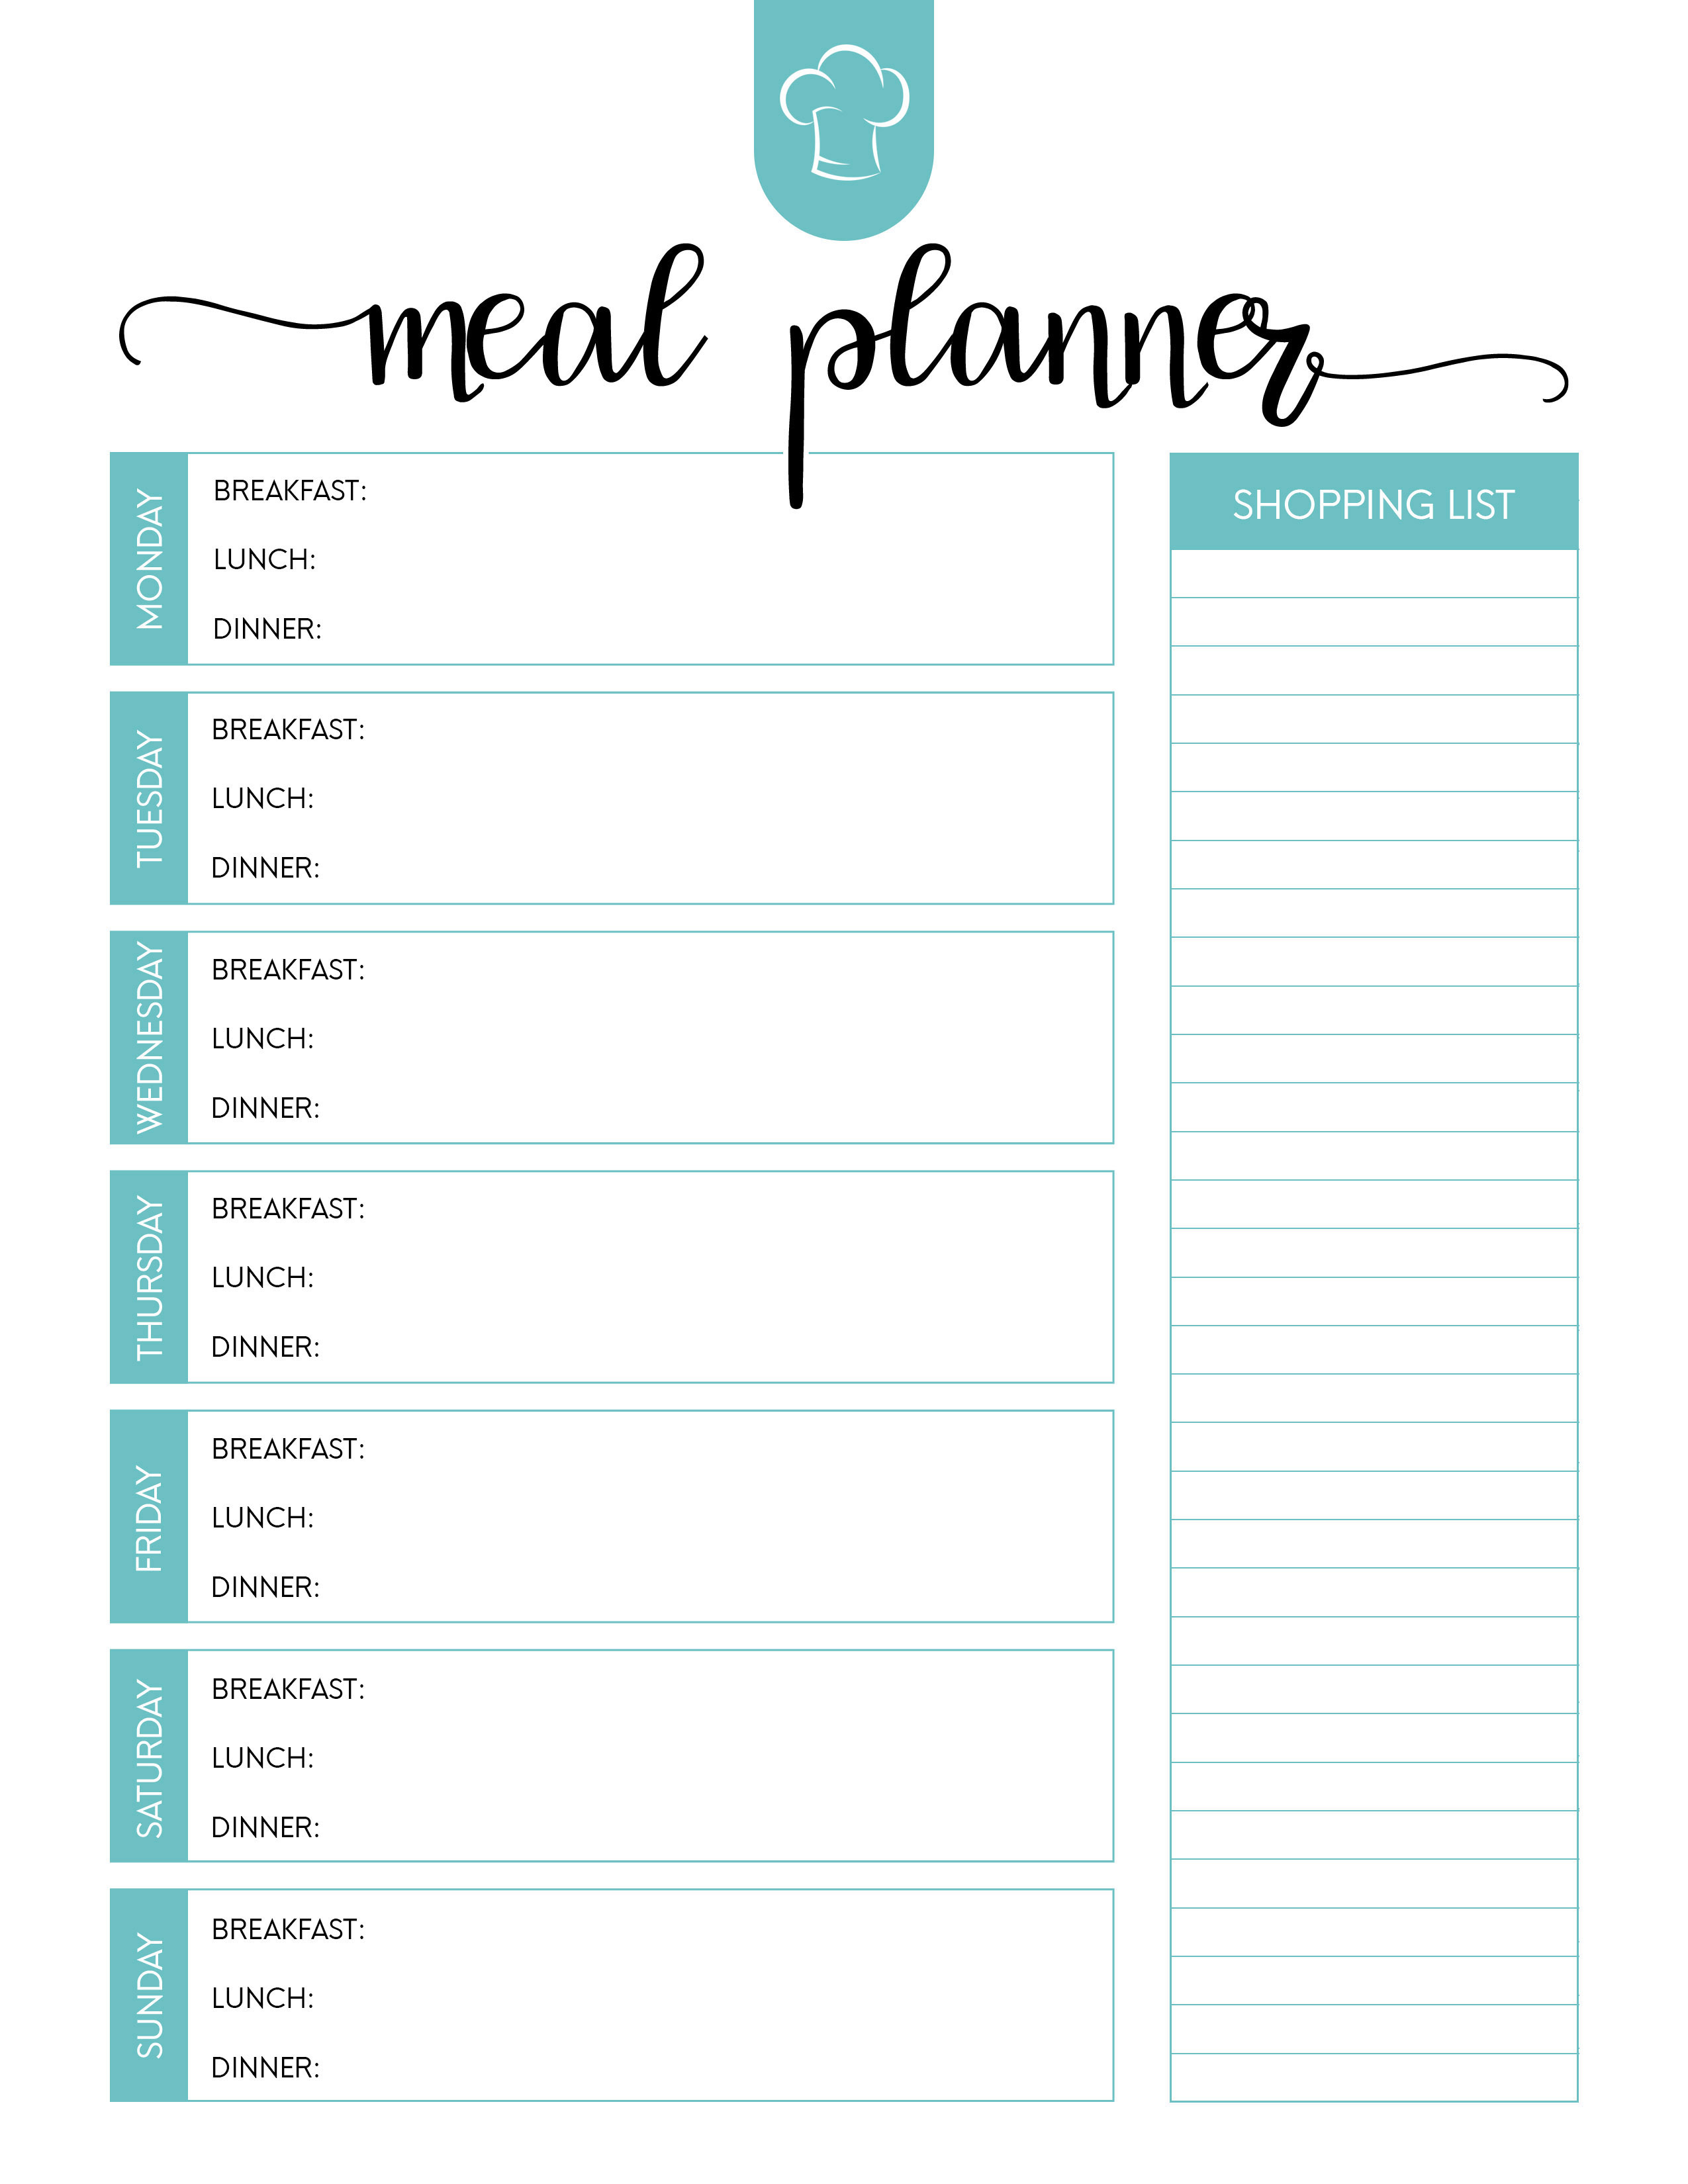 Free Printable Meal Planner Set - The Cottage Market - Free Printable Weekly Dinner Menu Planner